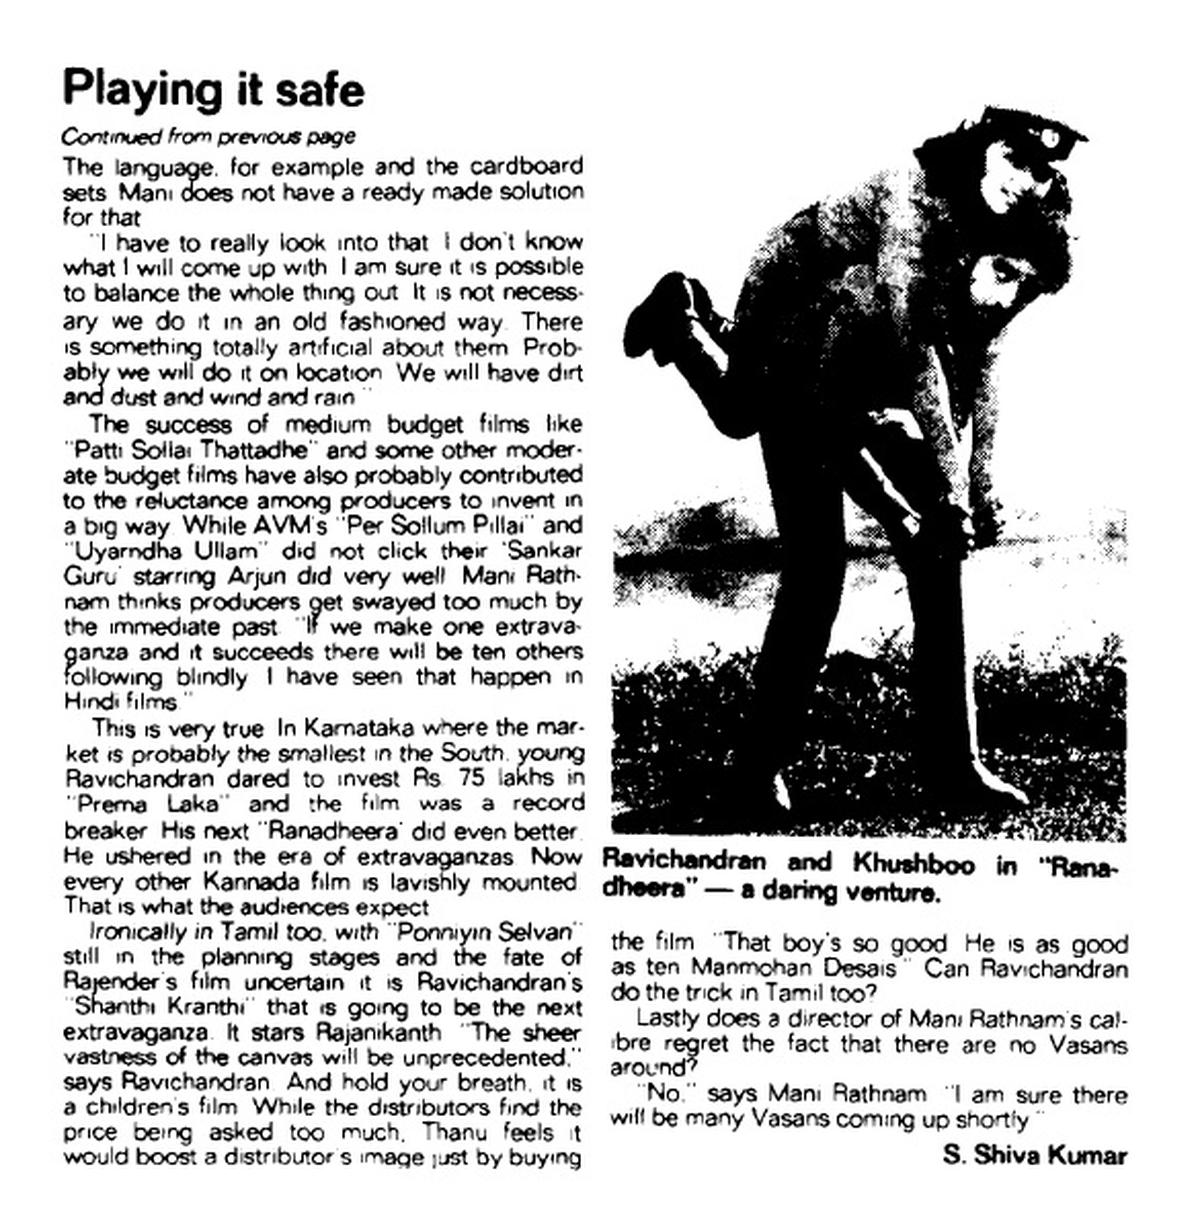 ‘Playing it safe’: The news report published by The Hindu on 24-03-1989